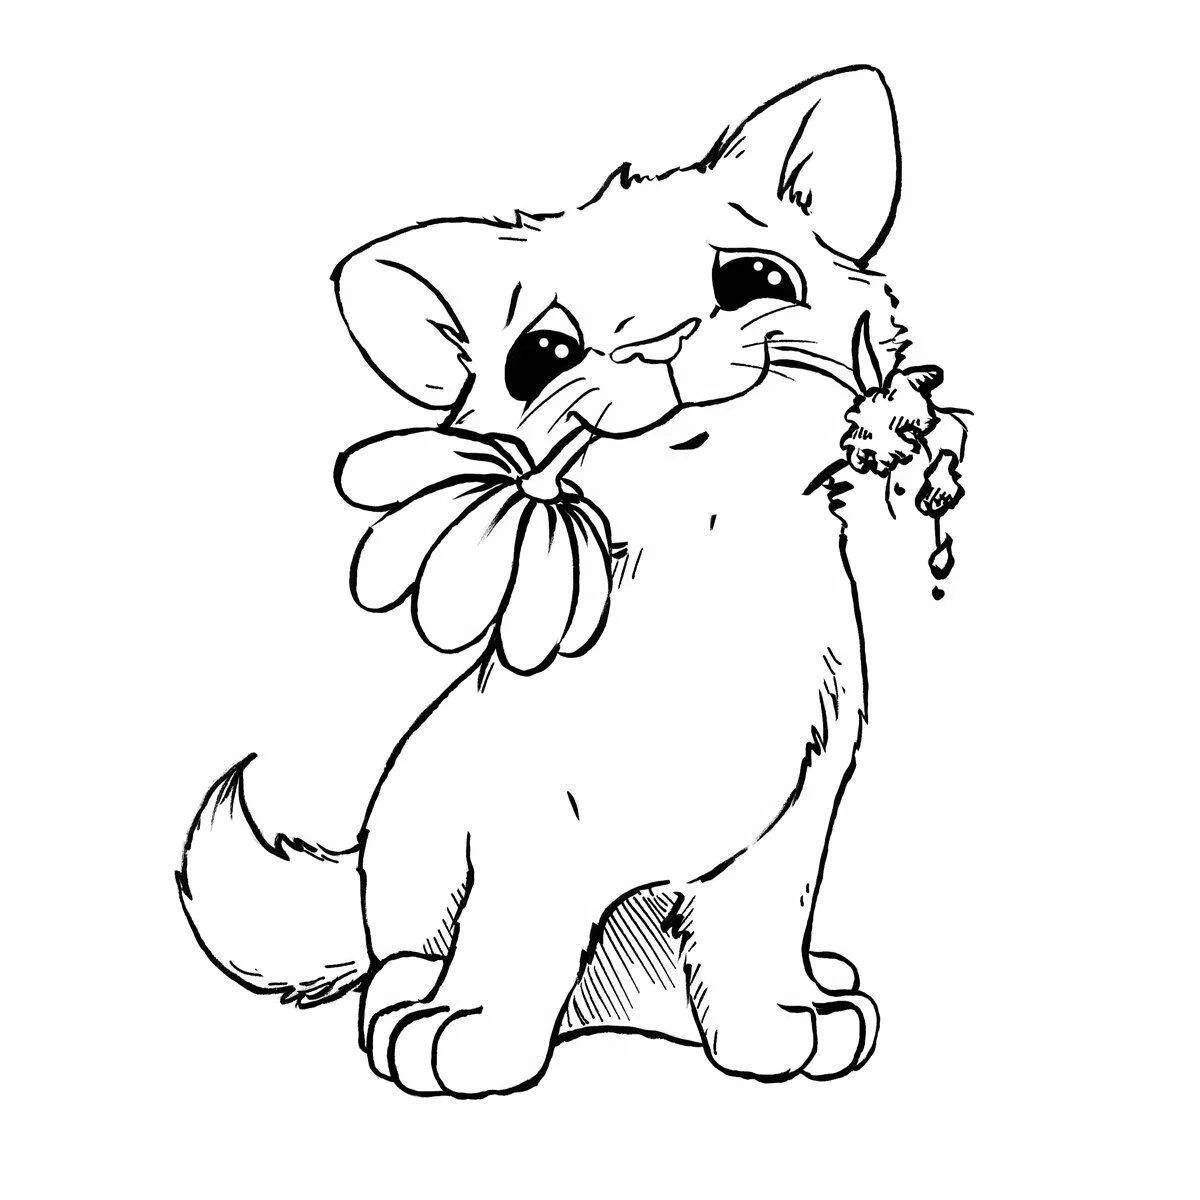 Adorable cat with flowers